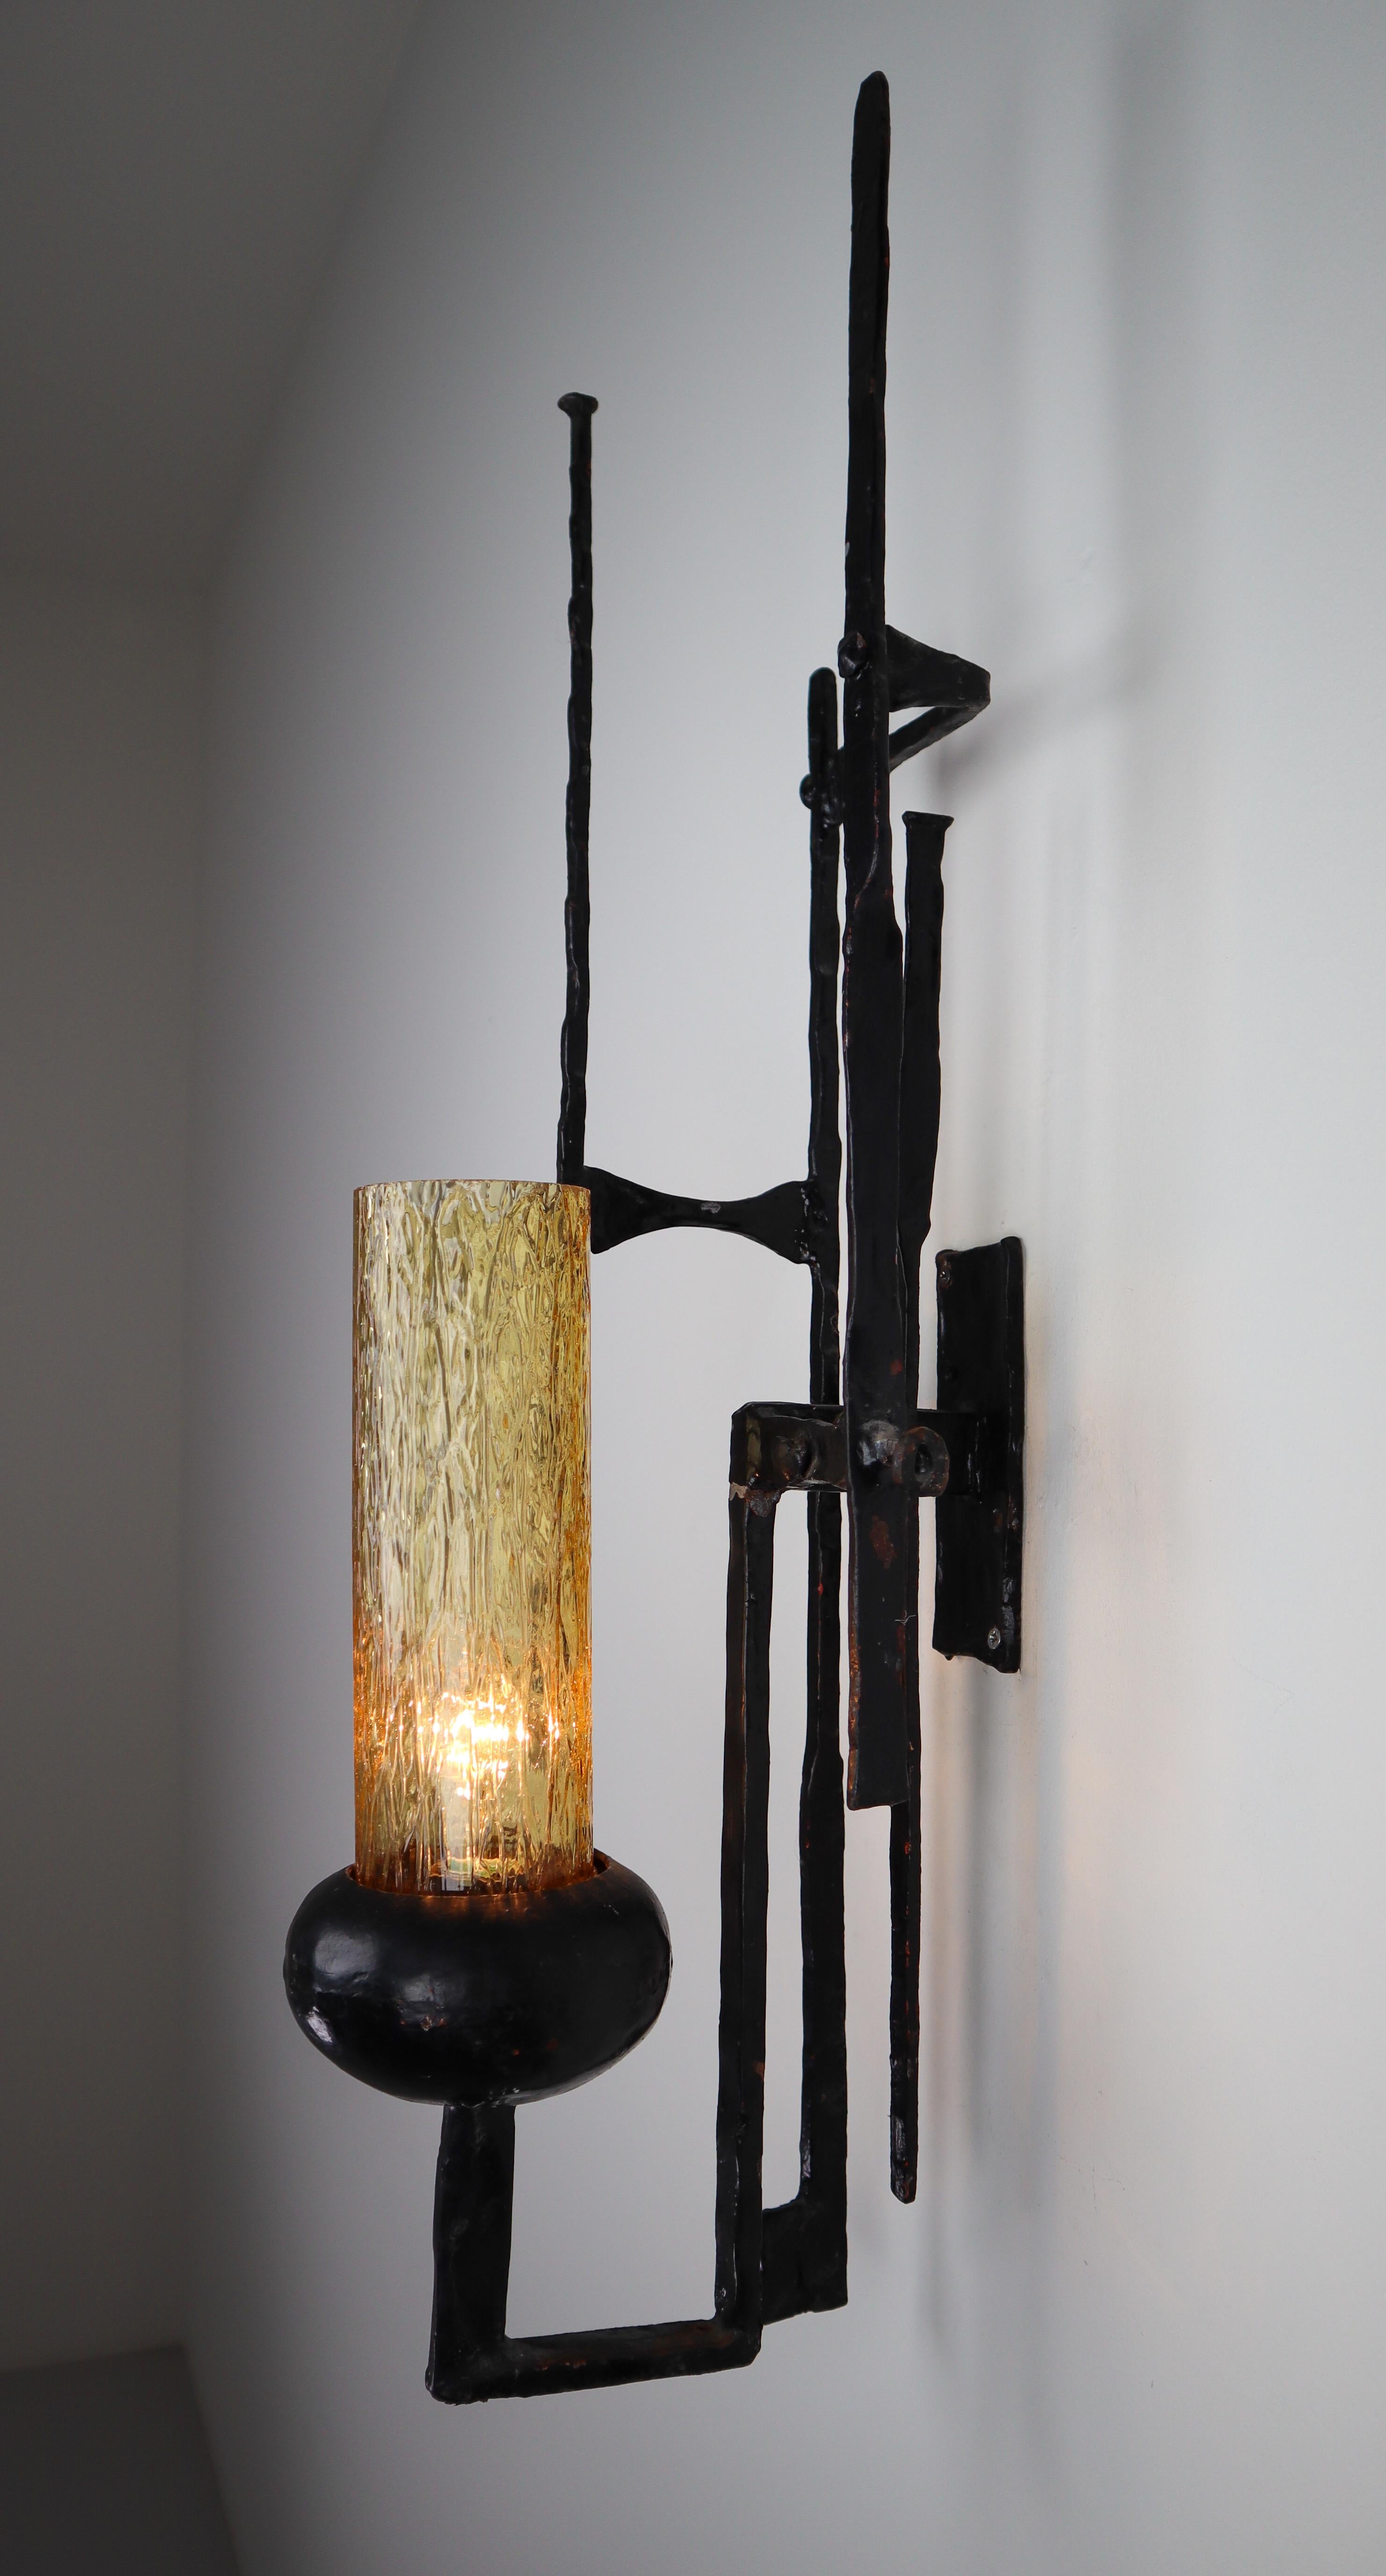 Large set patinated iron and amber color glass Brutalist wall sconces / sculptures, Italy, 1960s. Pure artistic handwrought sculptural frame decorated with amber glass wall lamp/decoration. The pleasant light it spreads is very atmospheric, these